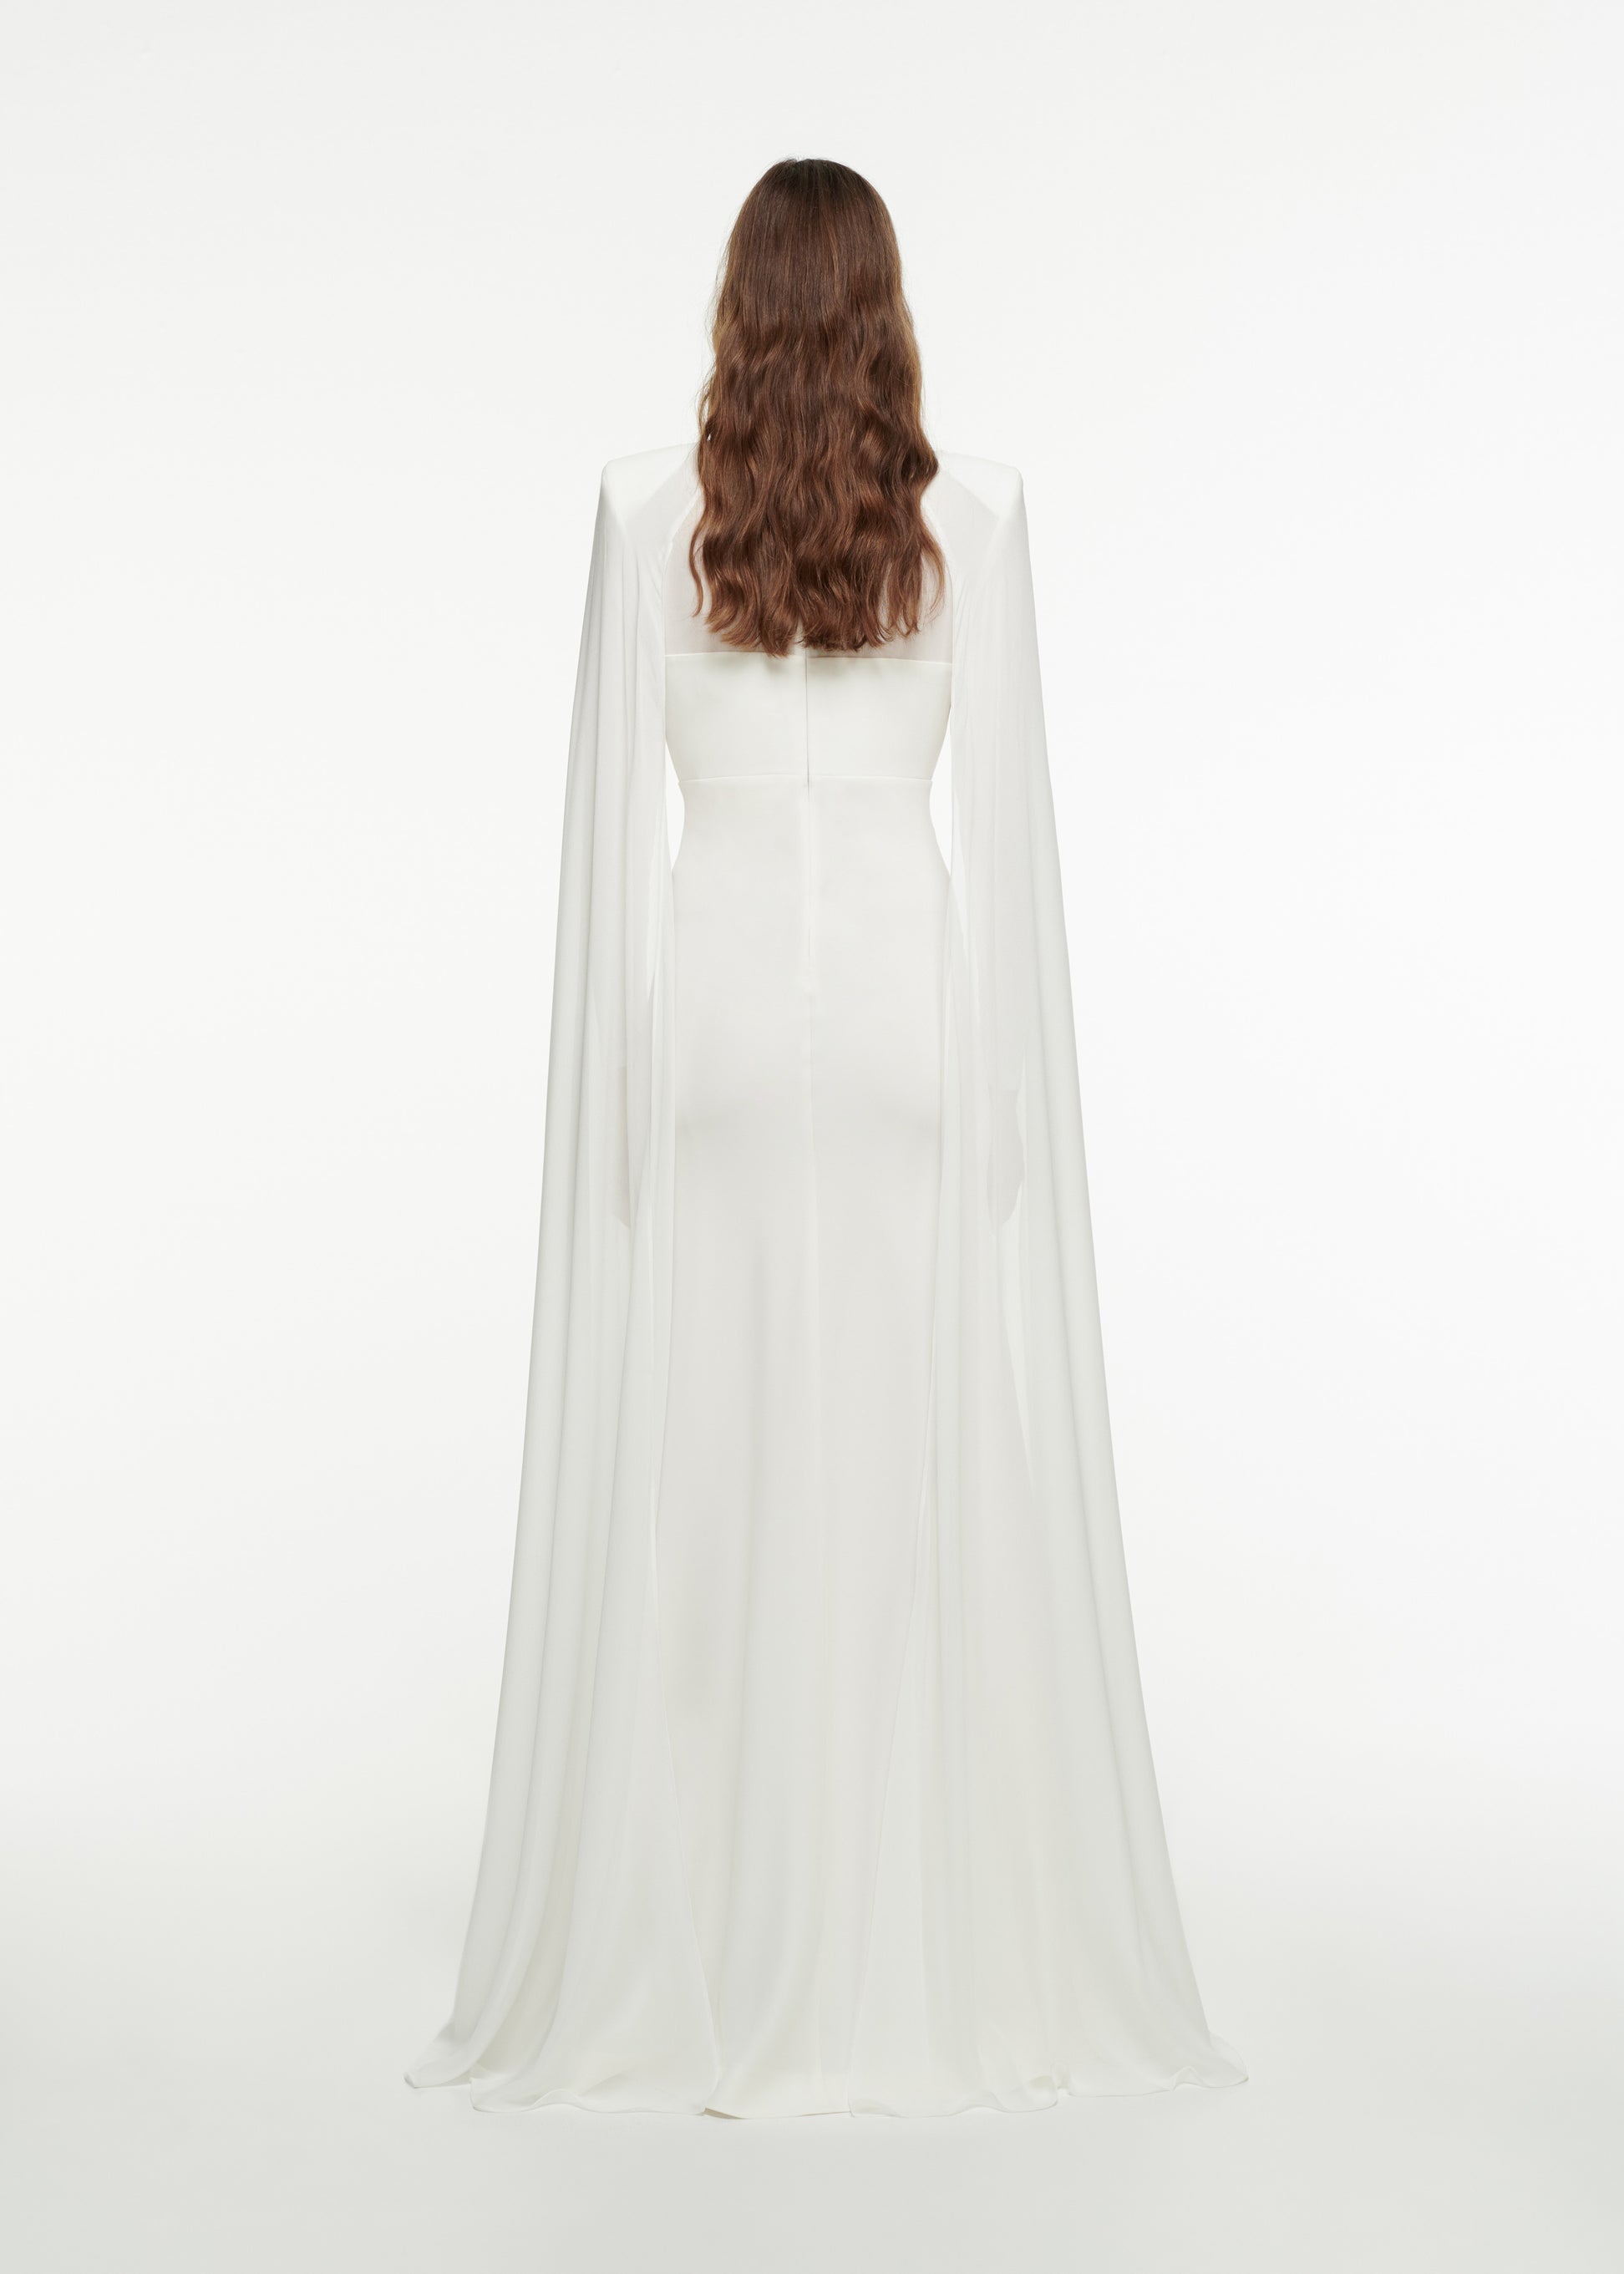 The back of a woman wearing the Long Sleeve Cape Gown in White 